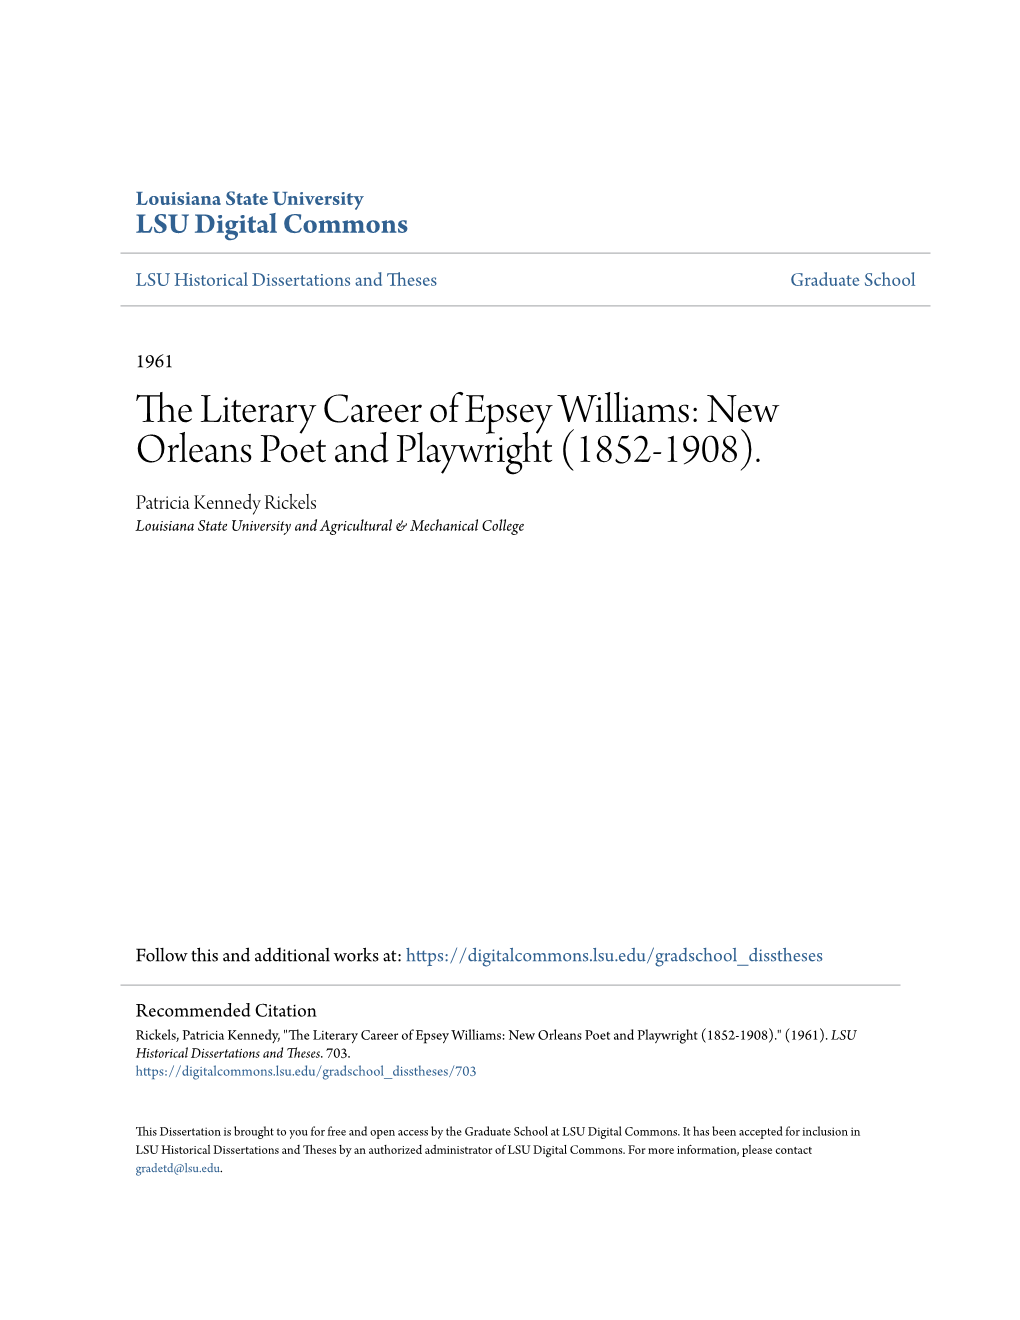 The Literary Career of Epsey Williams: New Orleans Poet and Playwright (1852-1908)